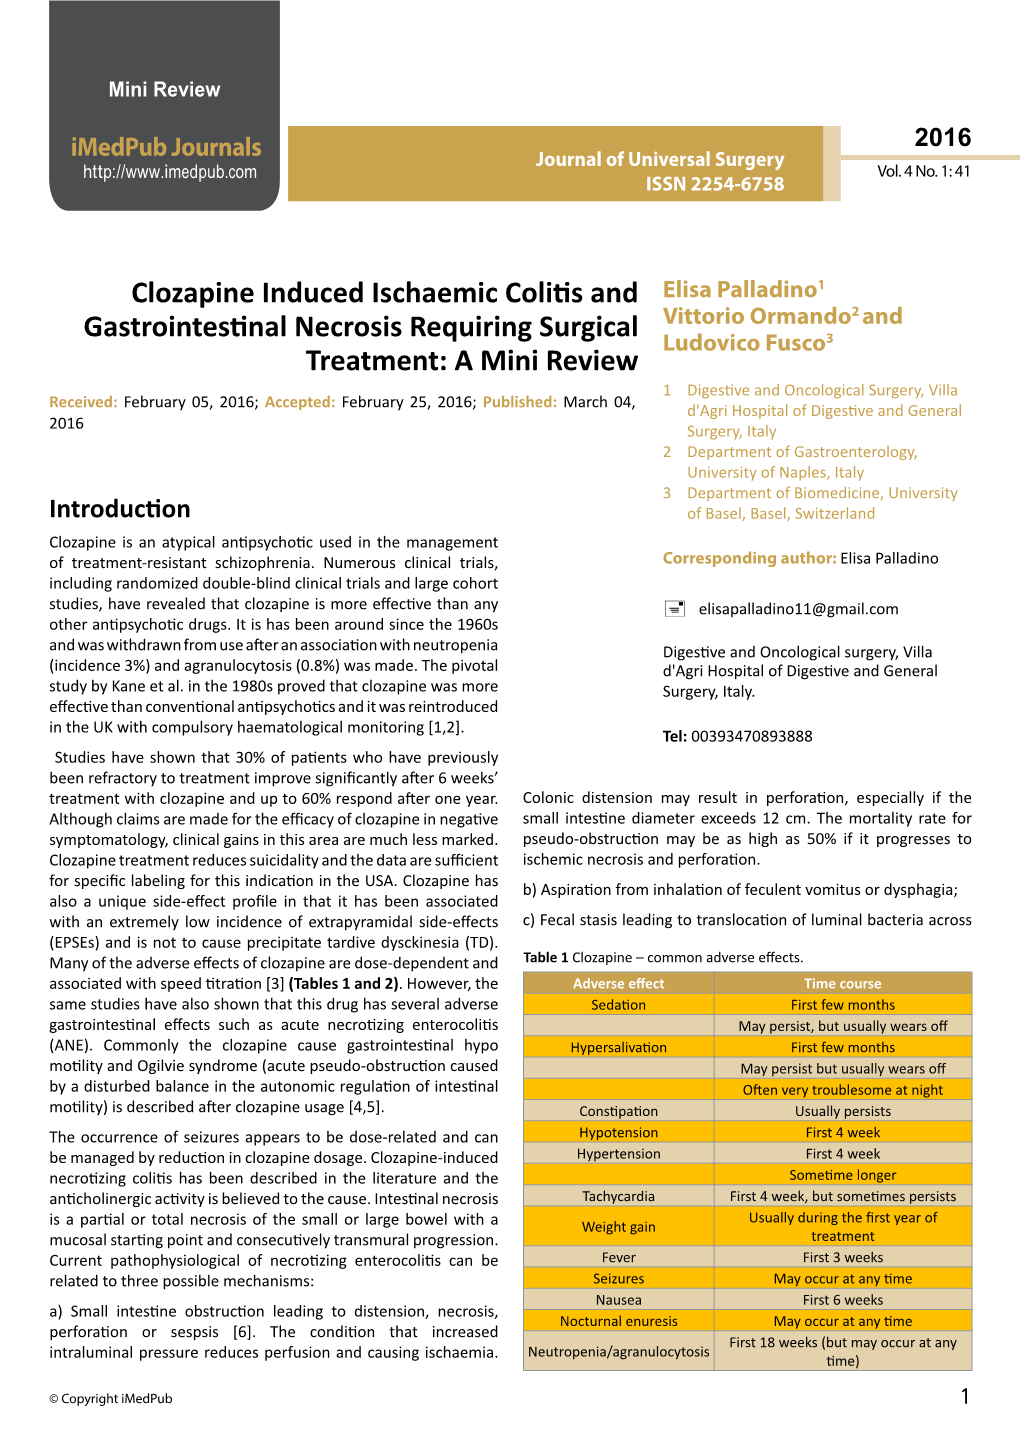 Clozapine Induced Ischaemic Colitis and Gastrointestinal Necrosis